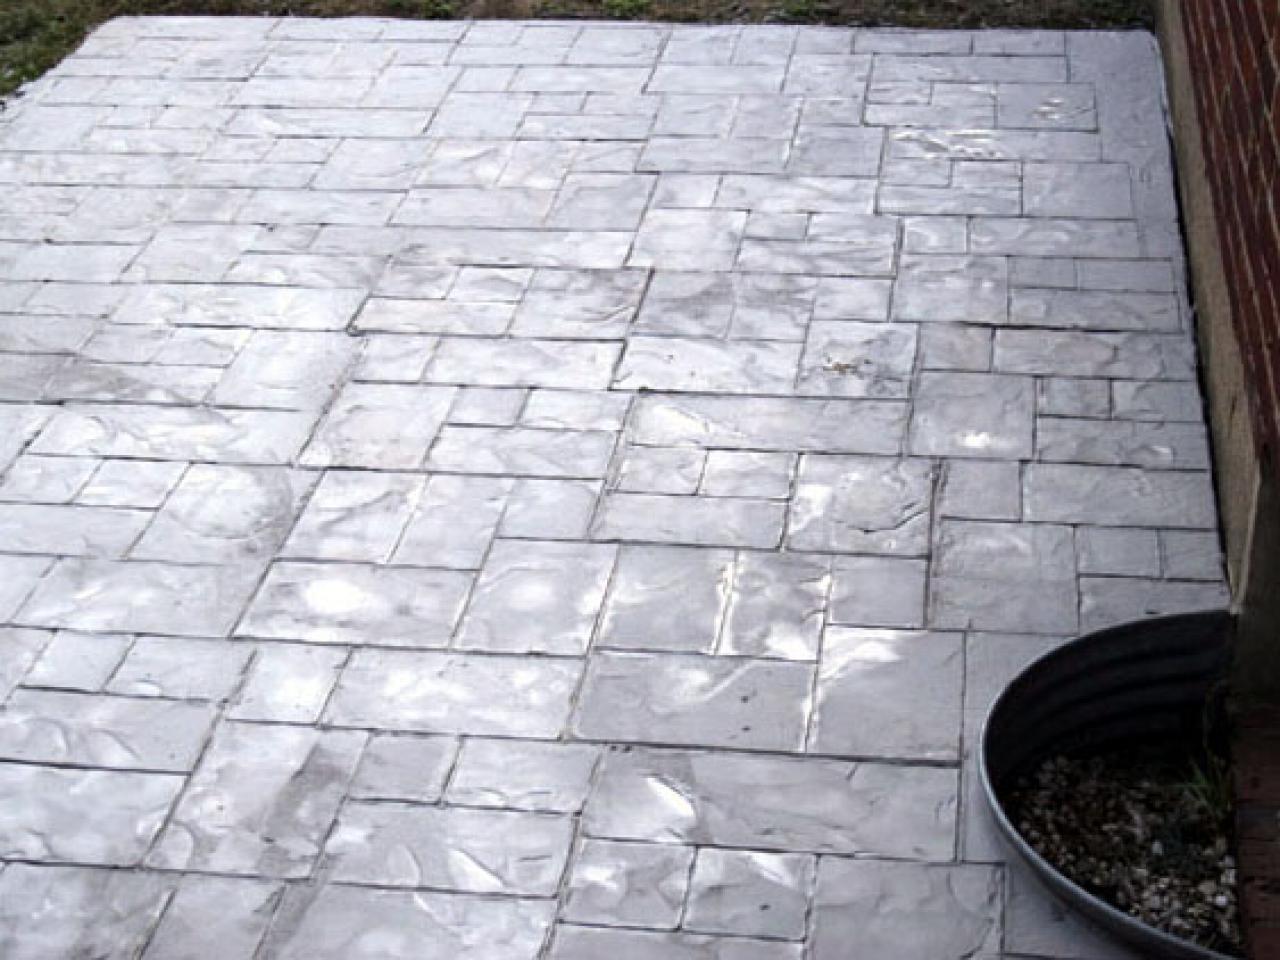 Enhance An Existing Patio With Concrete, How To Make Existing Concrete Patio Look Better